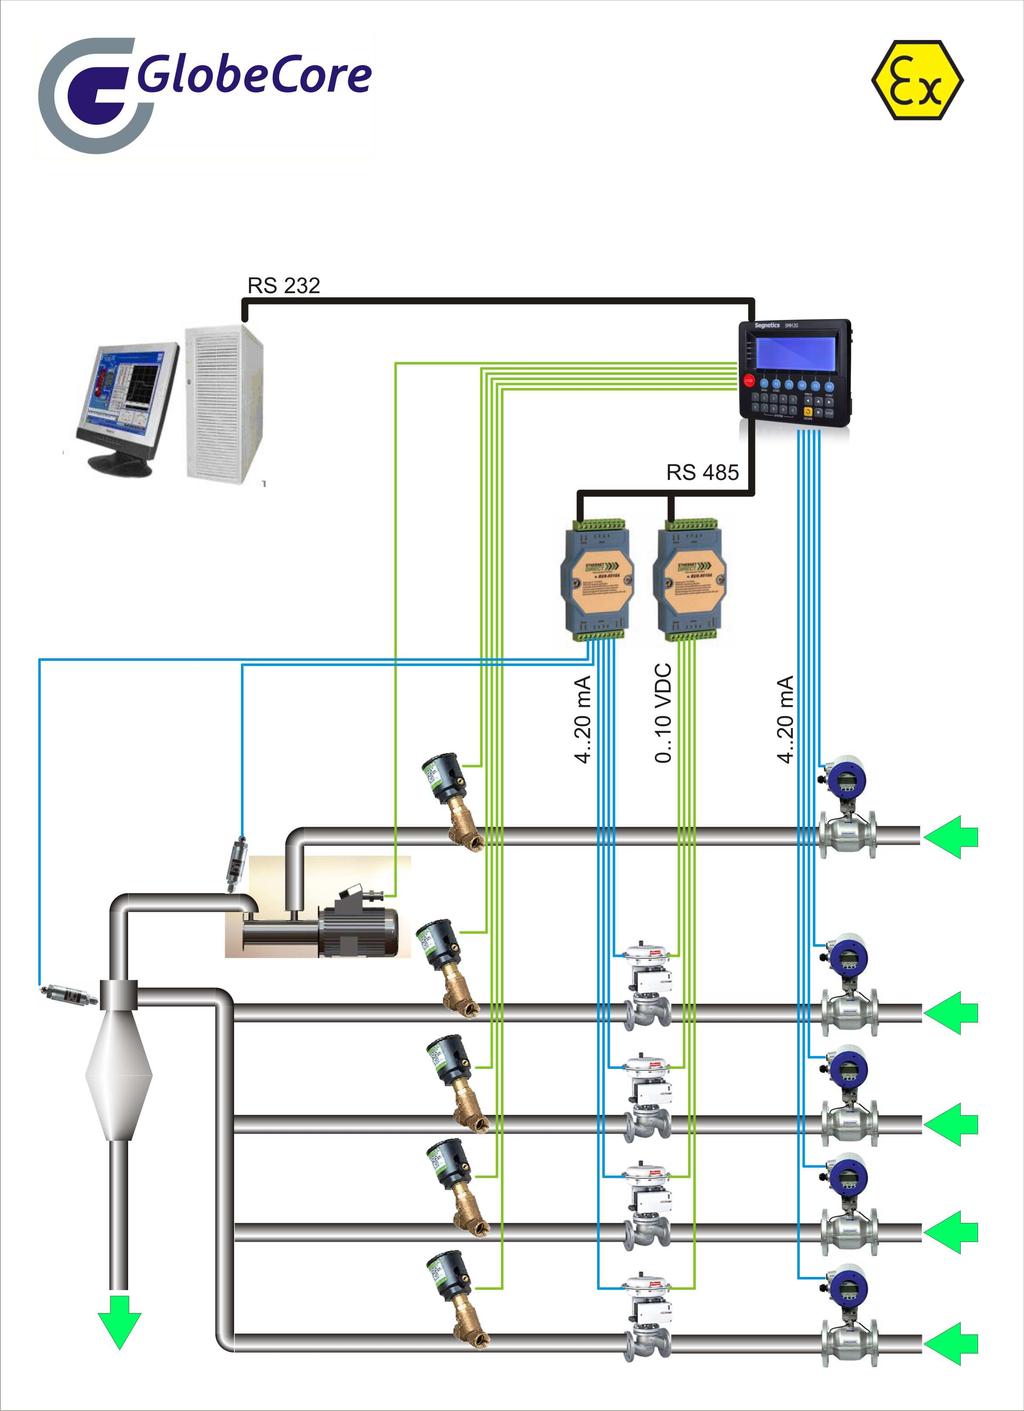 Process Automation of USB Systems The management system consists of the digital sensing transducers of the actual instant consumption of each additive, digital manifold pressure gauges, additives